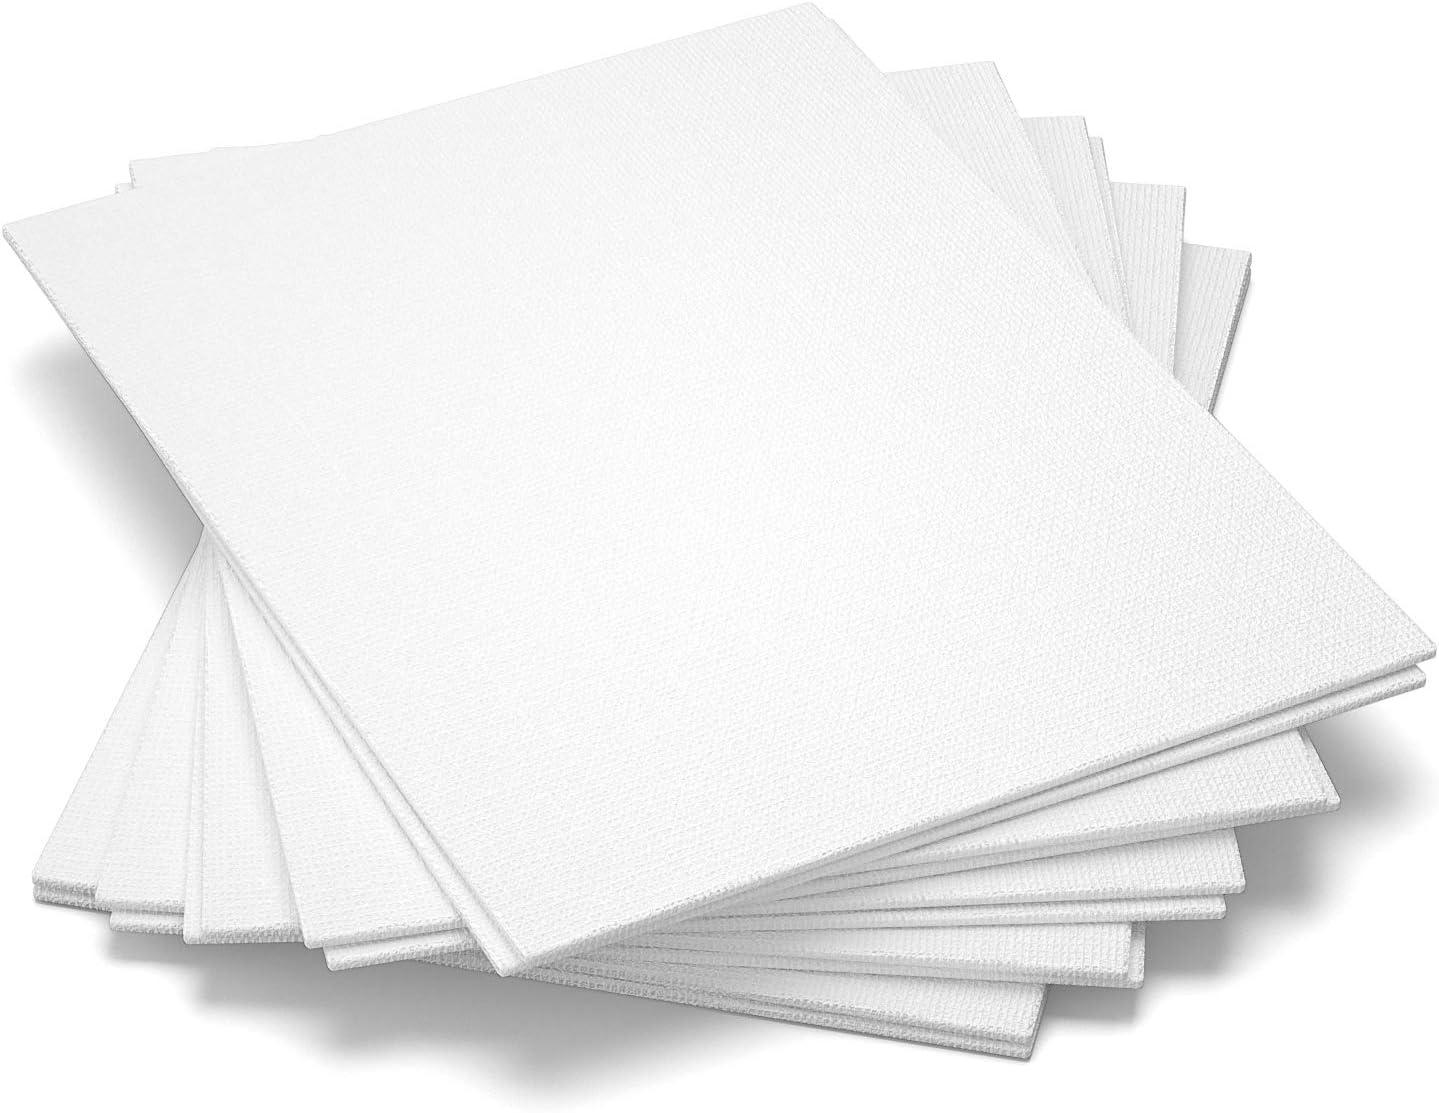  Canvases For Painting 12 Pack,8 X 10 Inch Painting Canvas,  Blank Canvas Boards For Painting- Gesso d Acid-Free 100% Cotton Canvas  Panels For Acrylics Oil Watercolor Tempera Paints